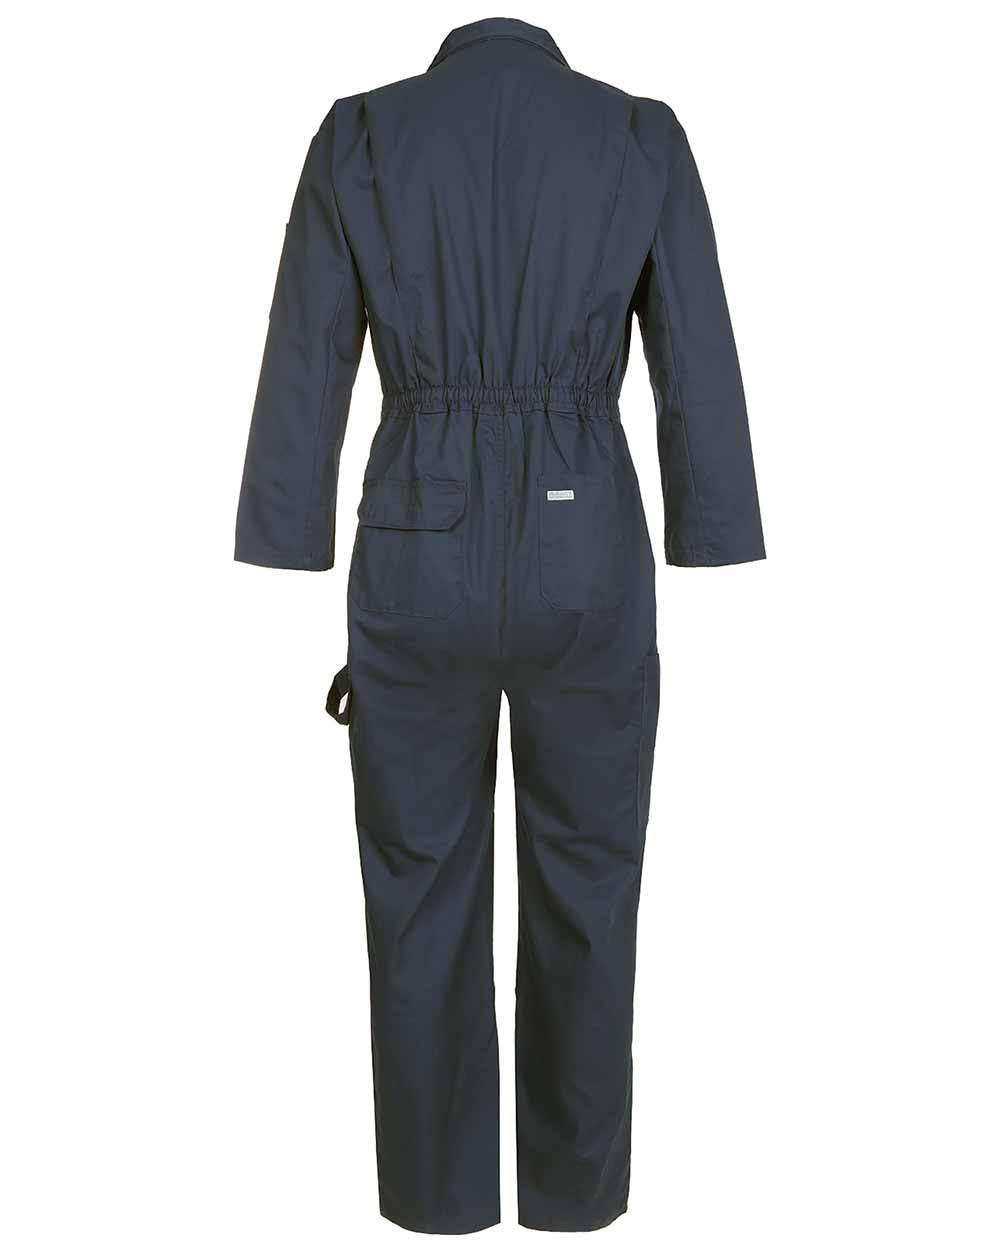 Back view showing elasticated waistband Fort Zip Front Boilersuit in Spruce 